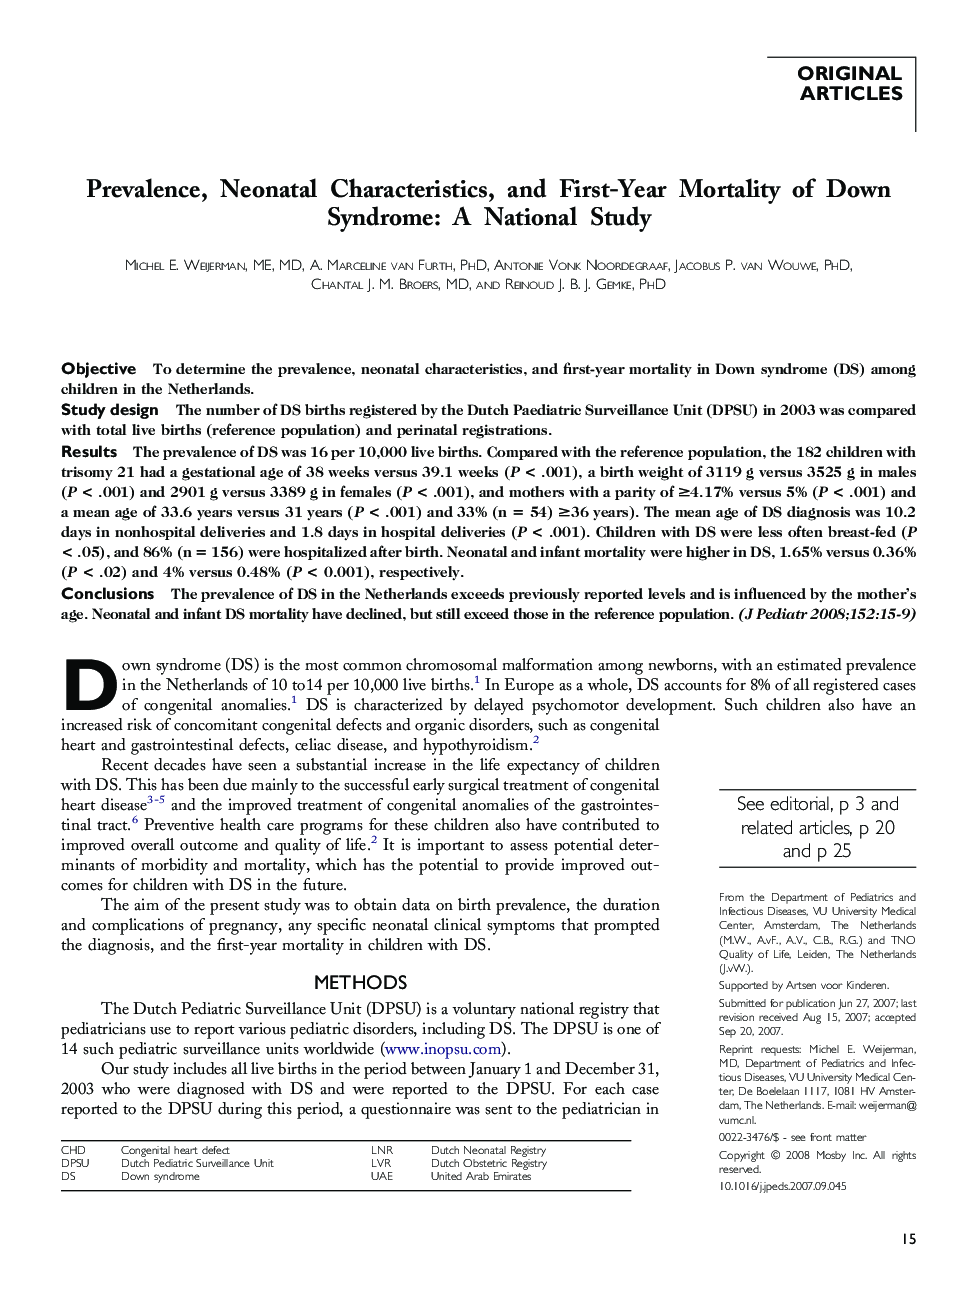 Prevalence, Neonatal Characteristics, and First-Year Mortality of Down Syndrome: A National Study 